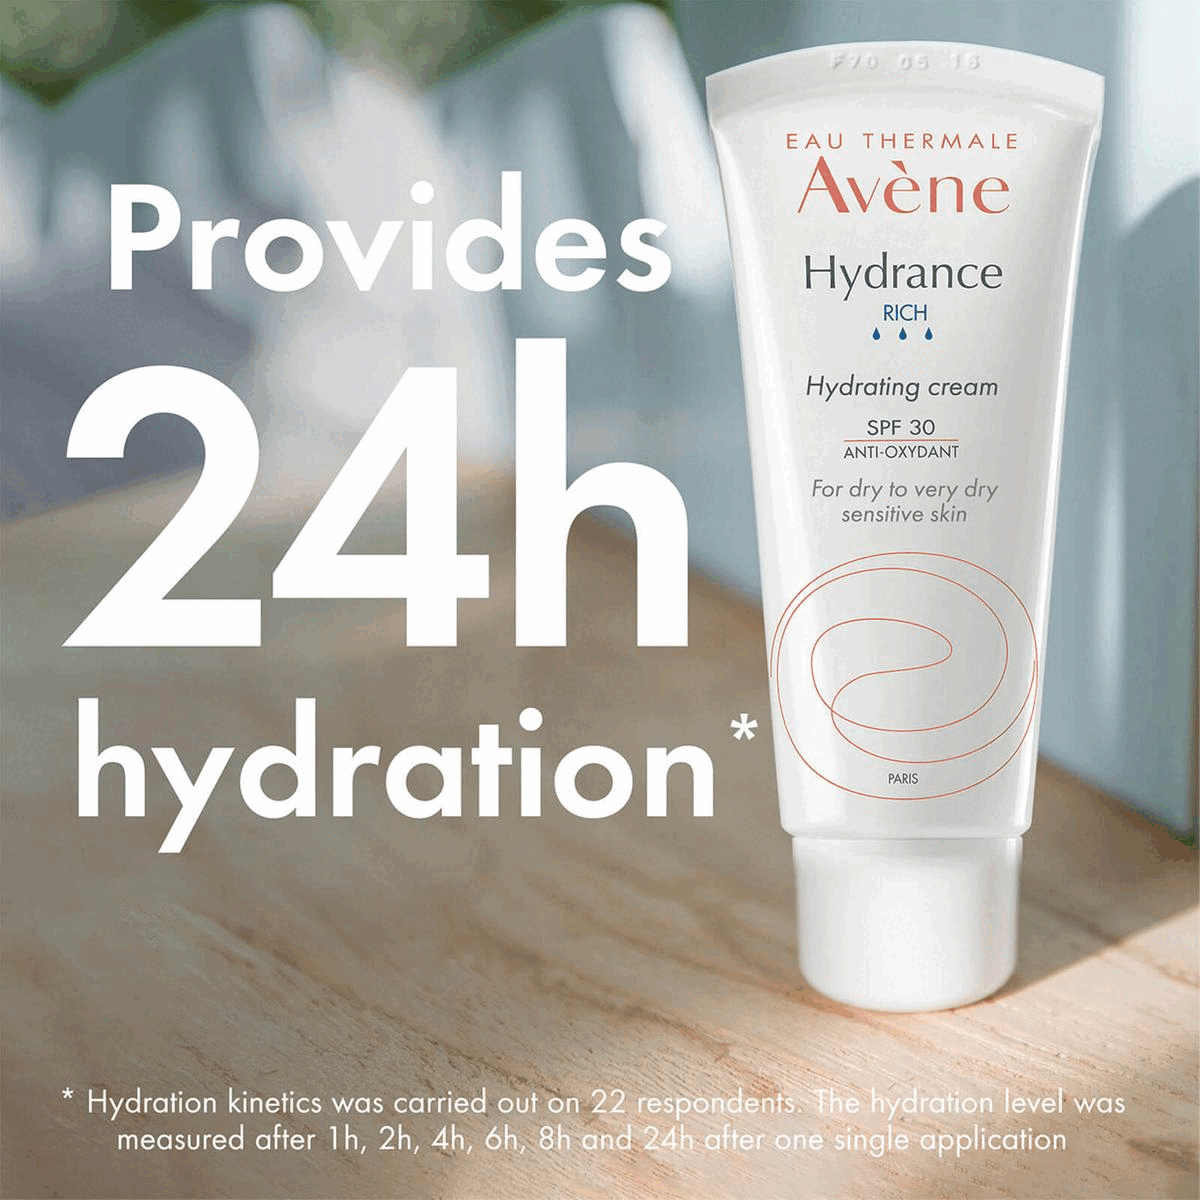 Provides 24h hydration. SPF 30 anti-oxydant. Discover the routine. Tested on sensitive skin, recommended by dermatologists.